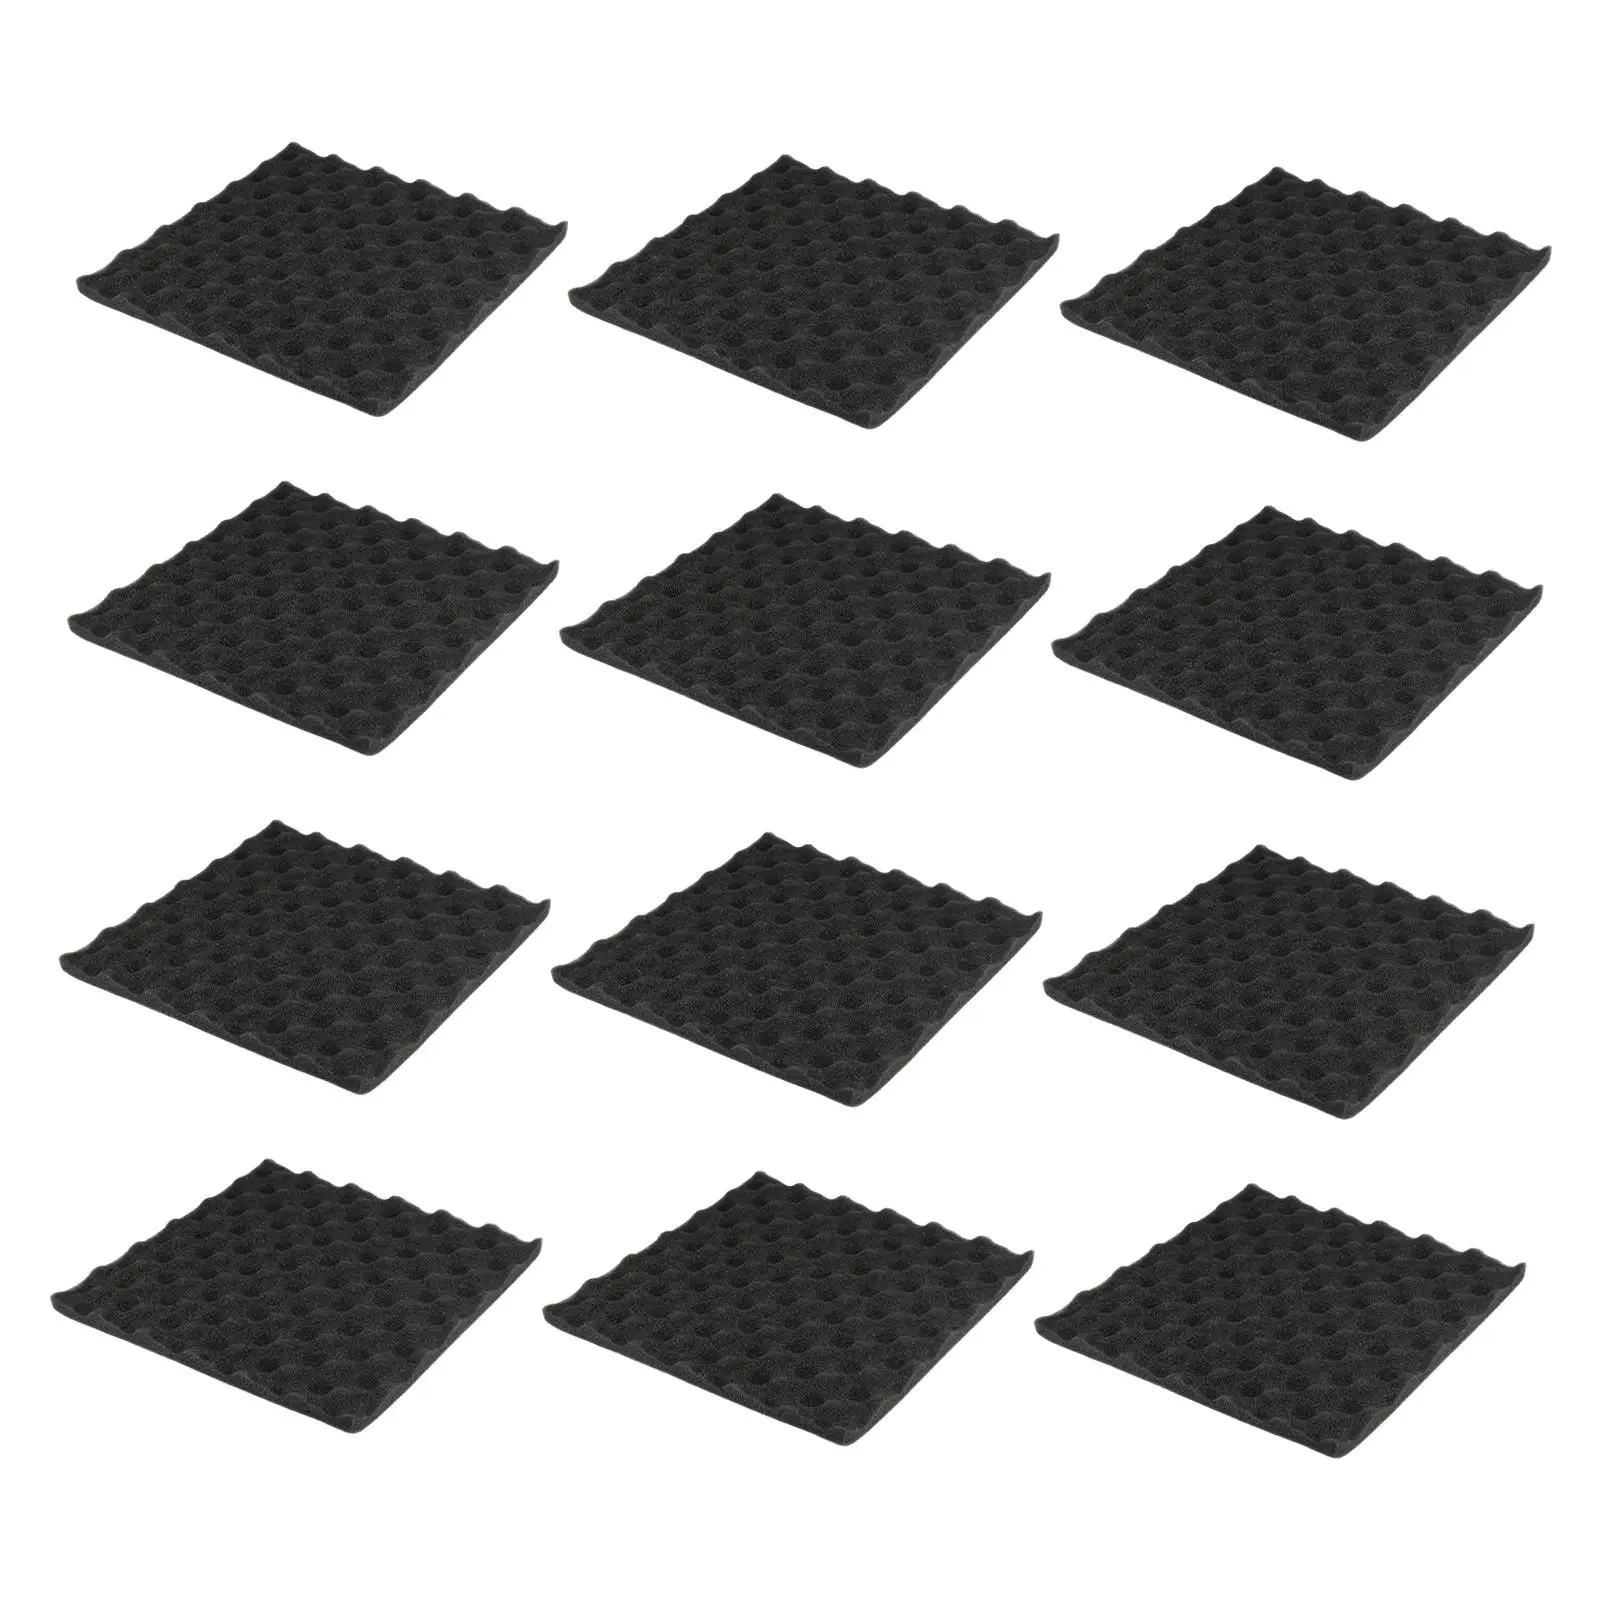 12Pcs Acoustic Foam Soundproofing Reduce Noise Background Sound Panels Soundproofing Foam Sound Panels Wedges for Ceiling Home